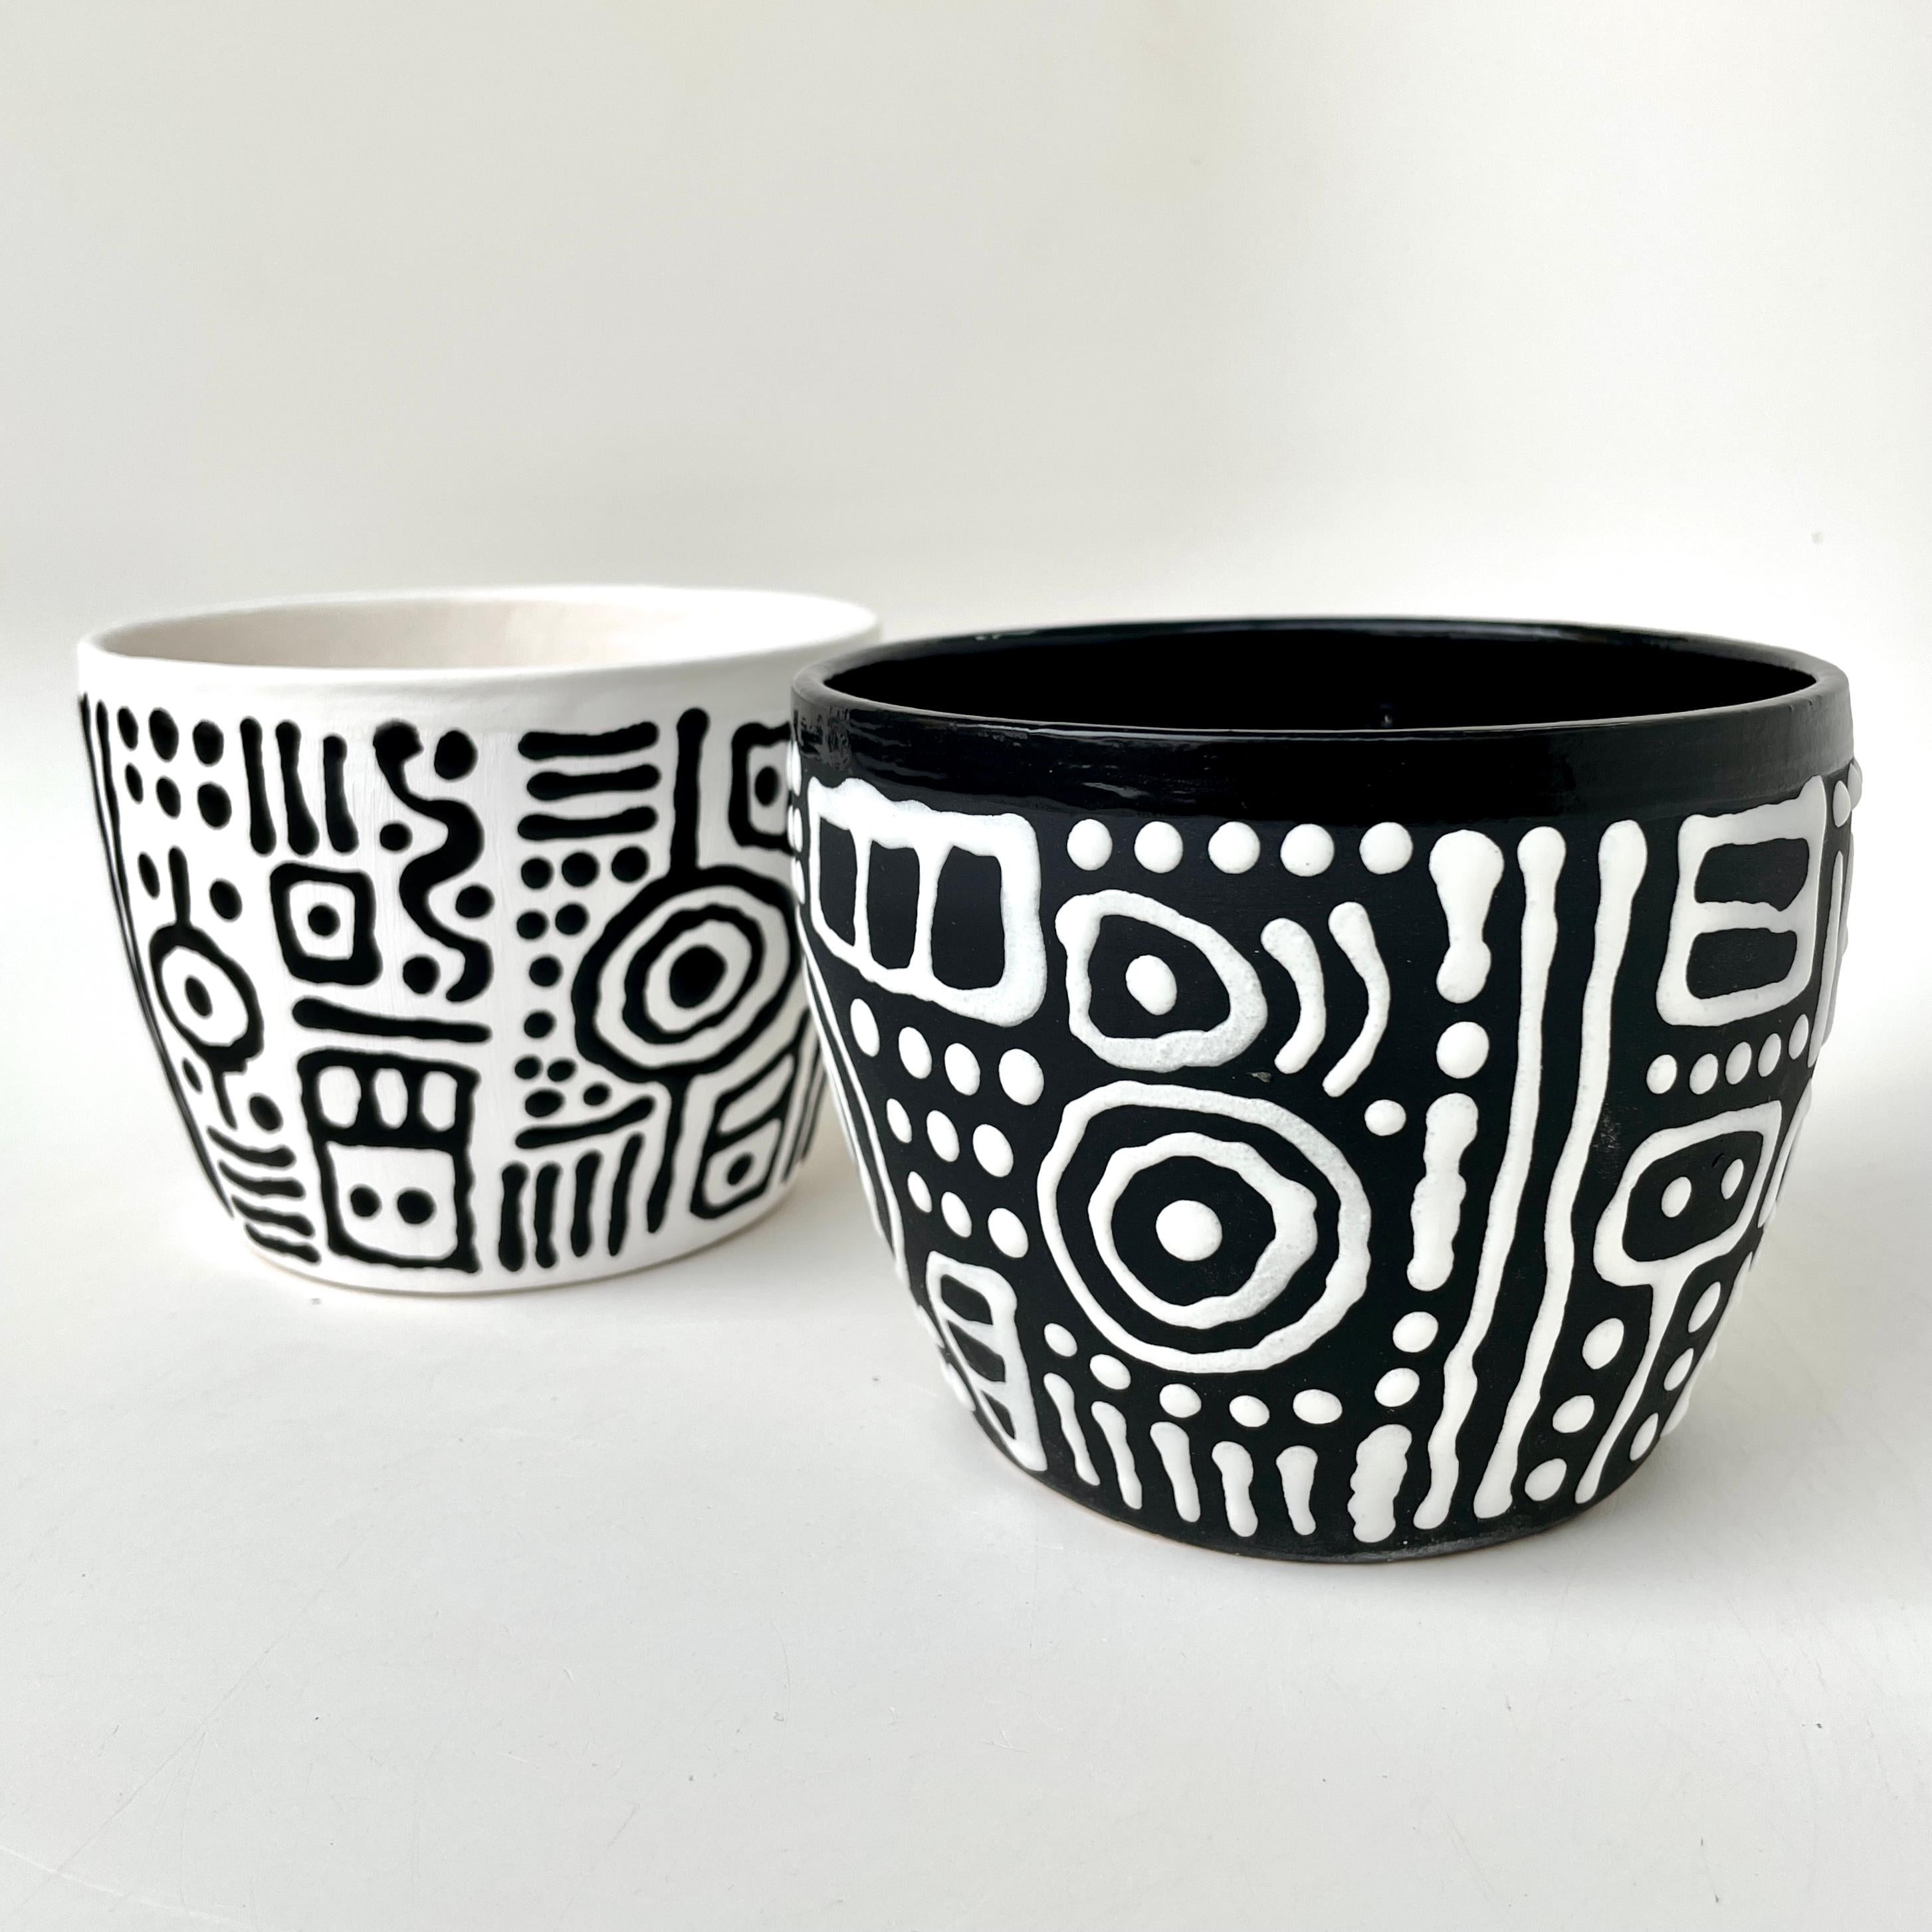 North American La Mola Tumbler, Handmade and Food Safe, by Artist Stef Duffy For Sale